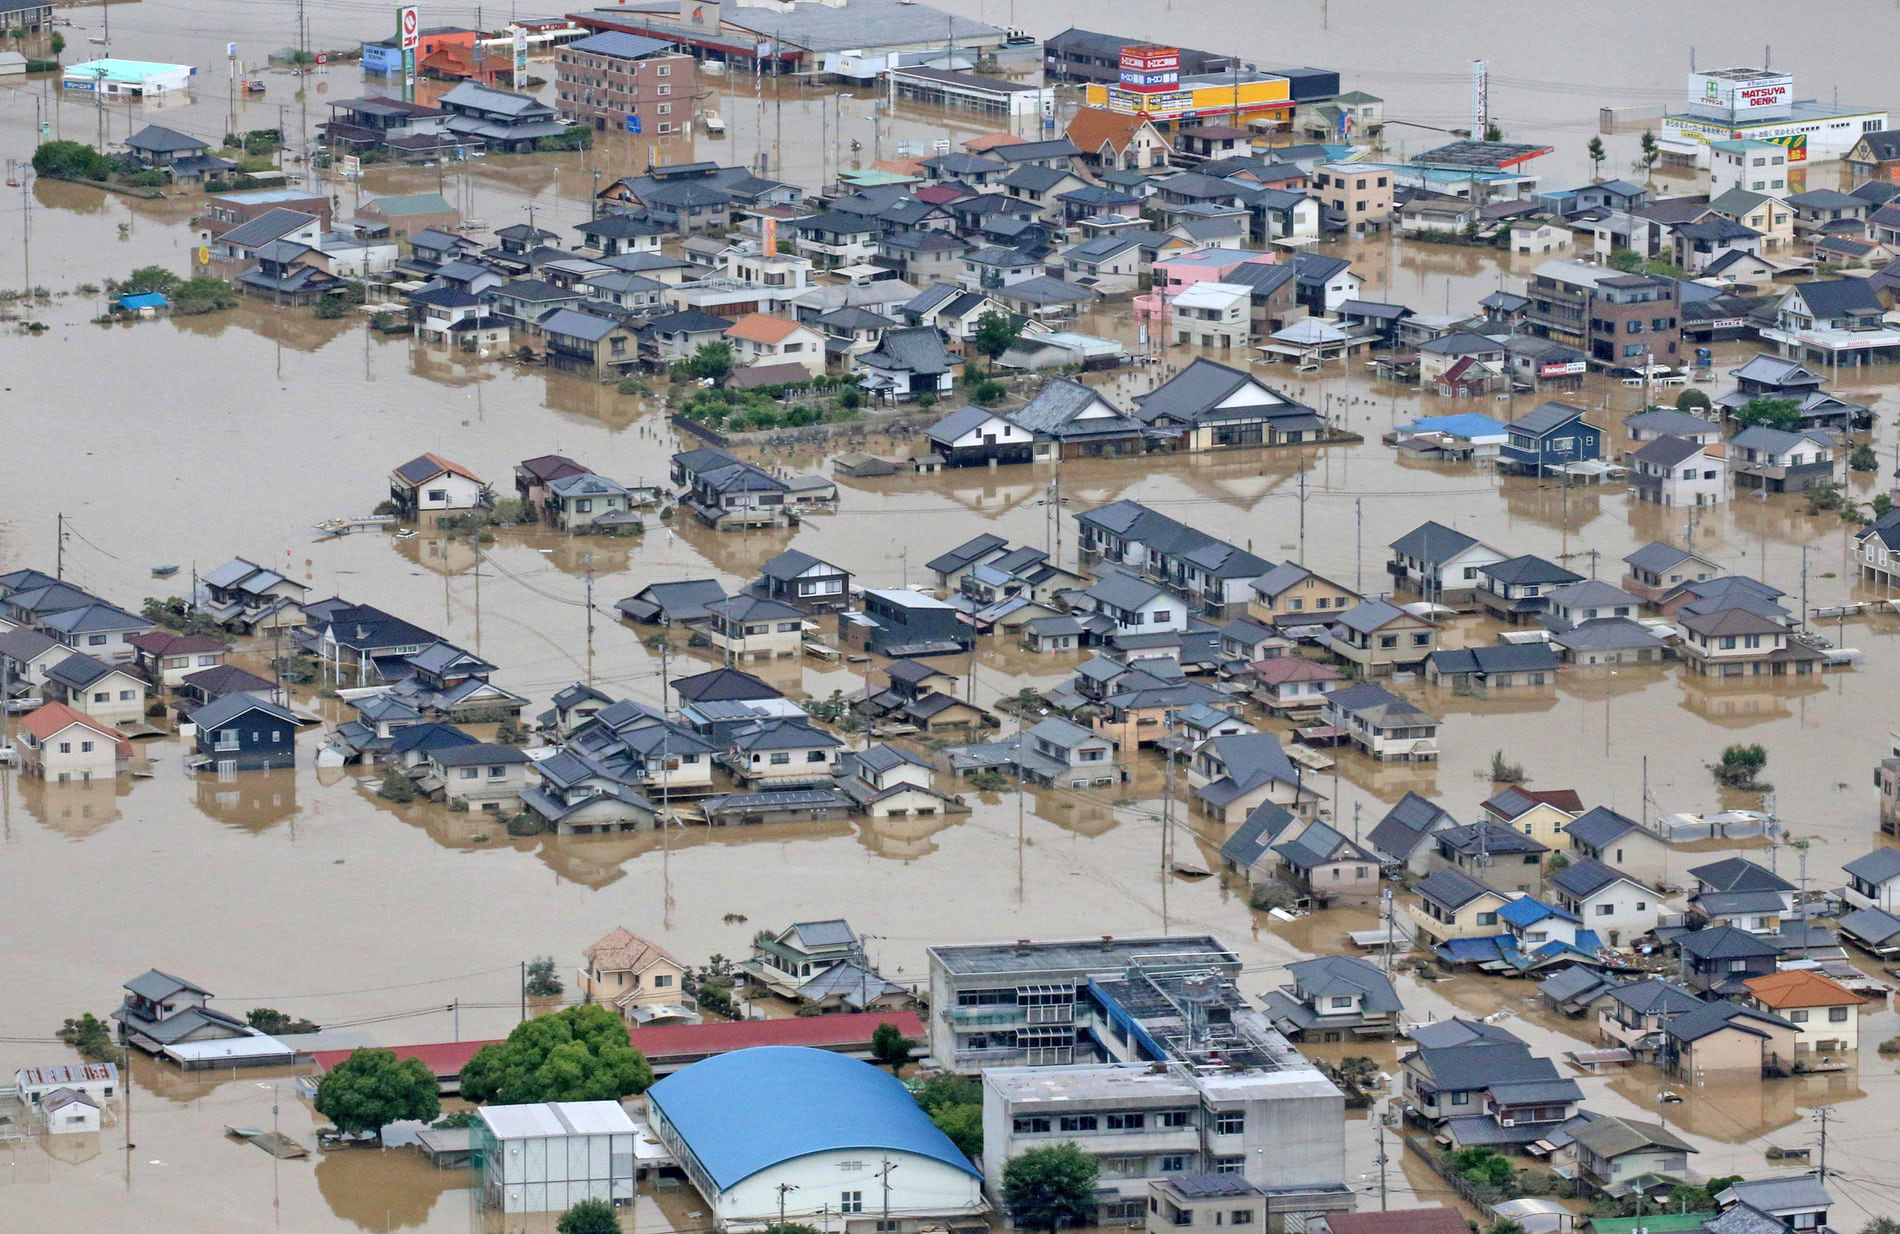 A-PAD in response as Super Typhoon “Maria” creates havoc across South-Western Japan